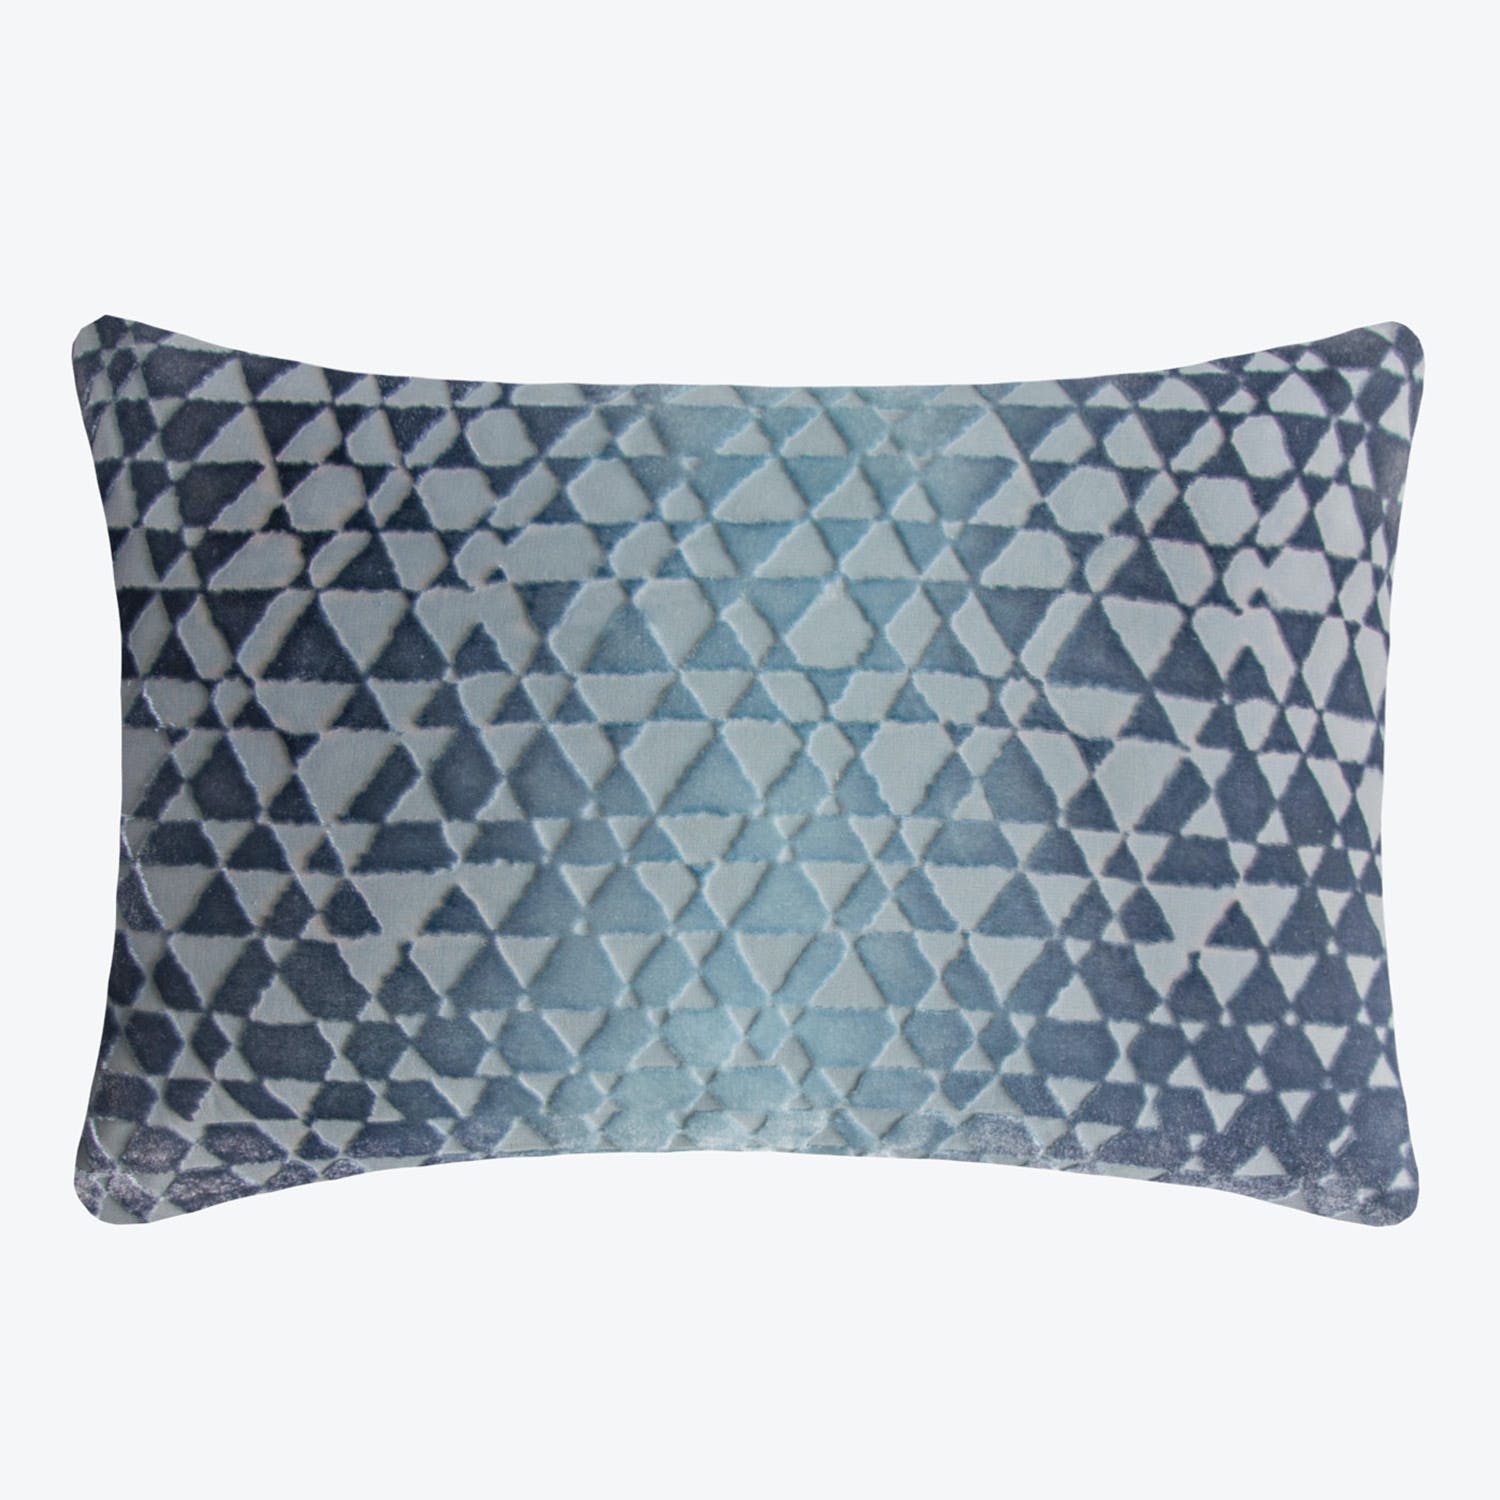 Rectangular decorative pillow with ombre triangle pattern in blue-gray shades.